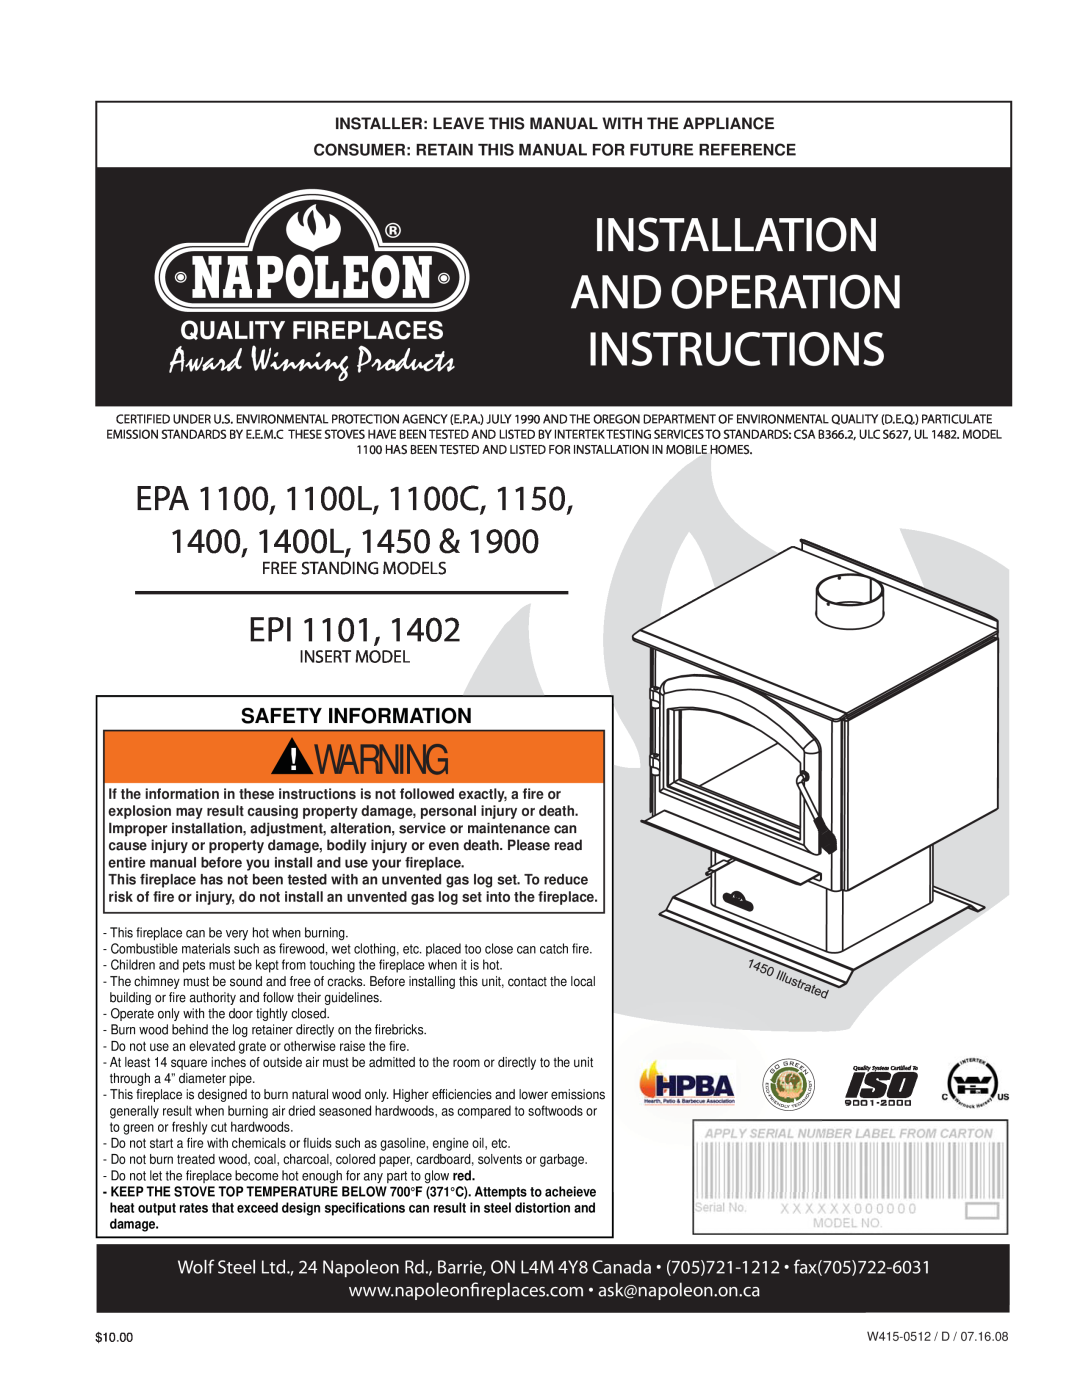 Napoleon Fireplaces EPA 1450 specifications Installation And Operation Instructions, EPA 1100, 1100L, 1100C, 1400, 1400L 